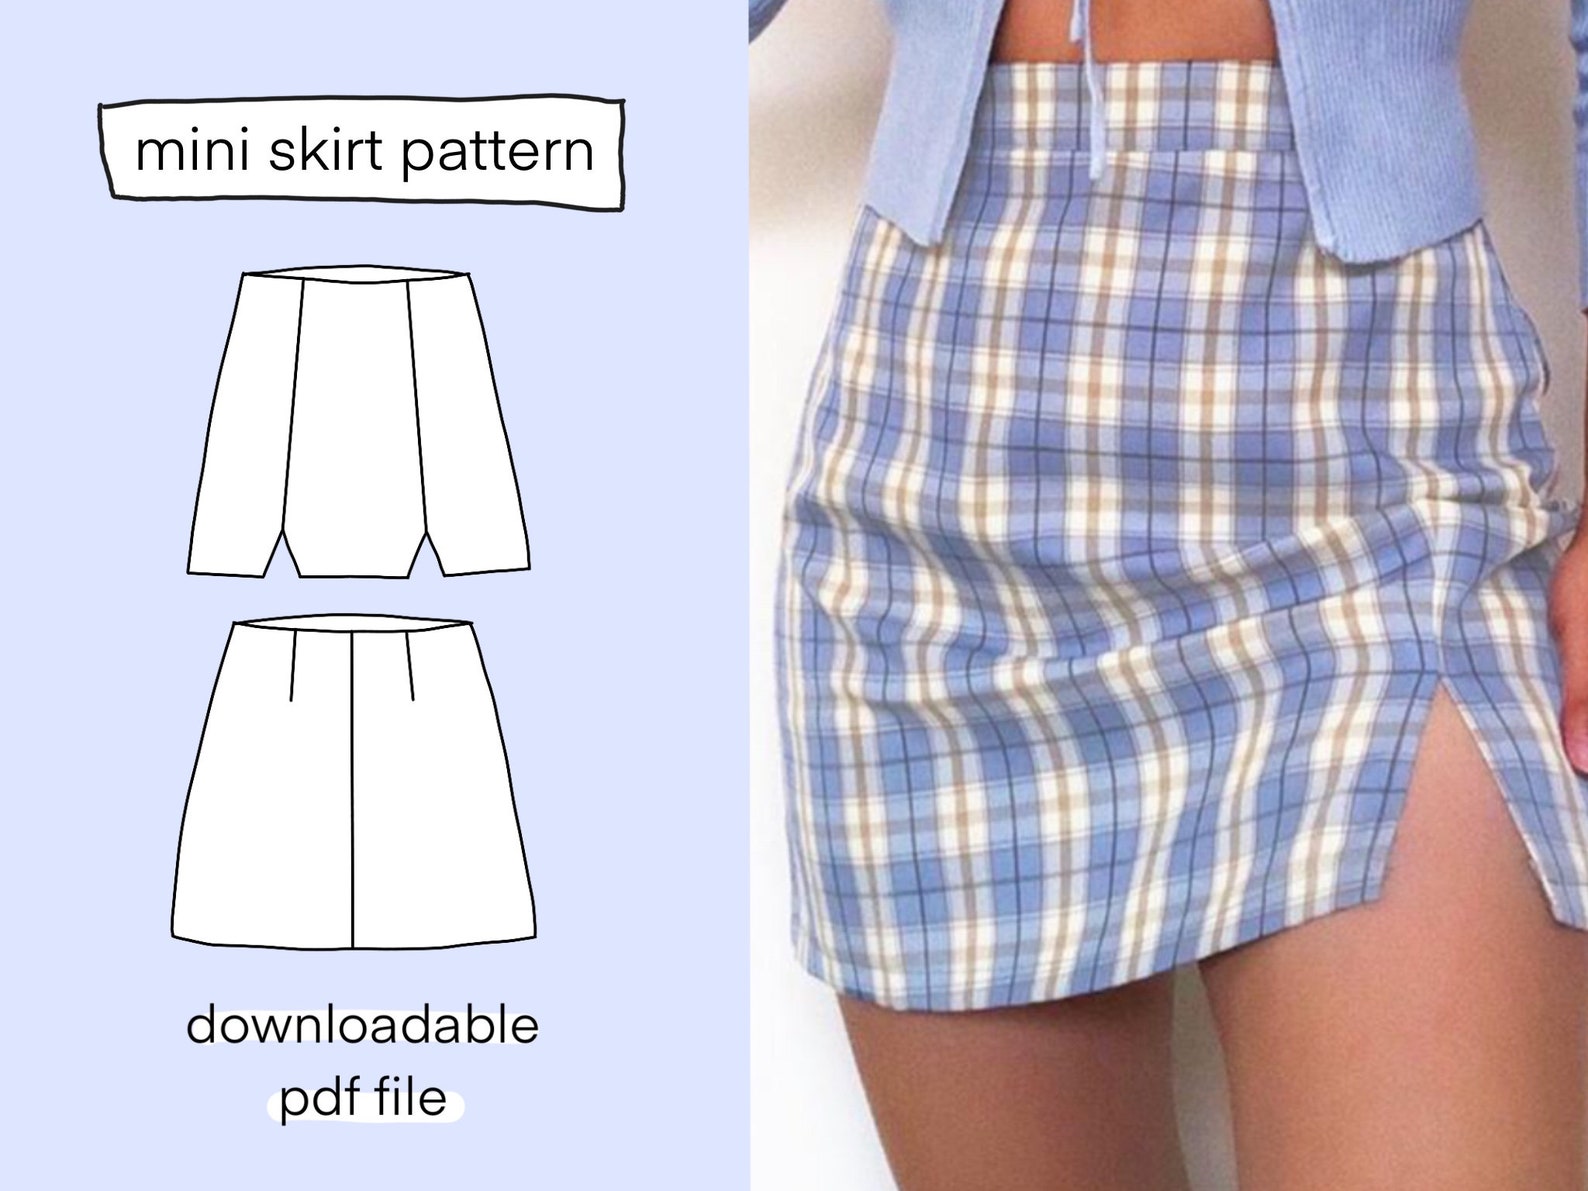 Mini skirt sewing pattern with slit PDF downloadable 6 sizes | Etsy